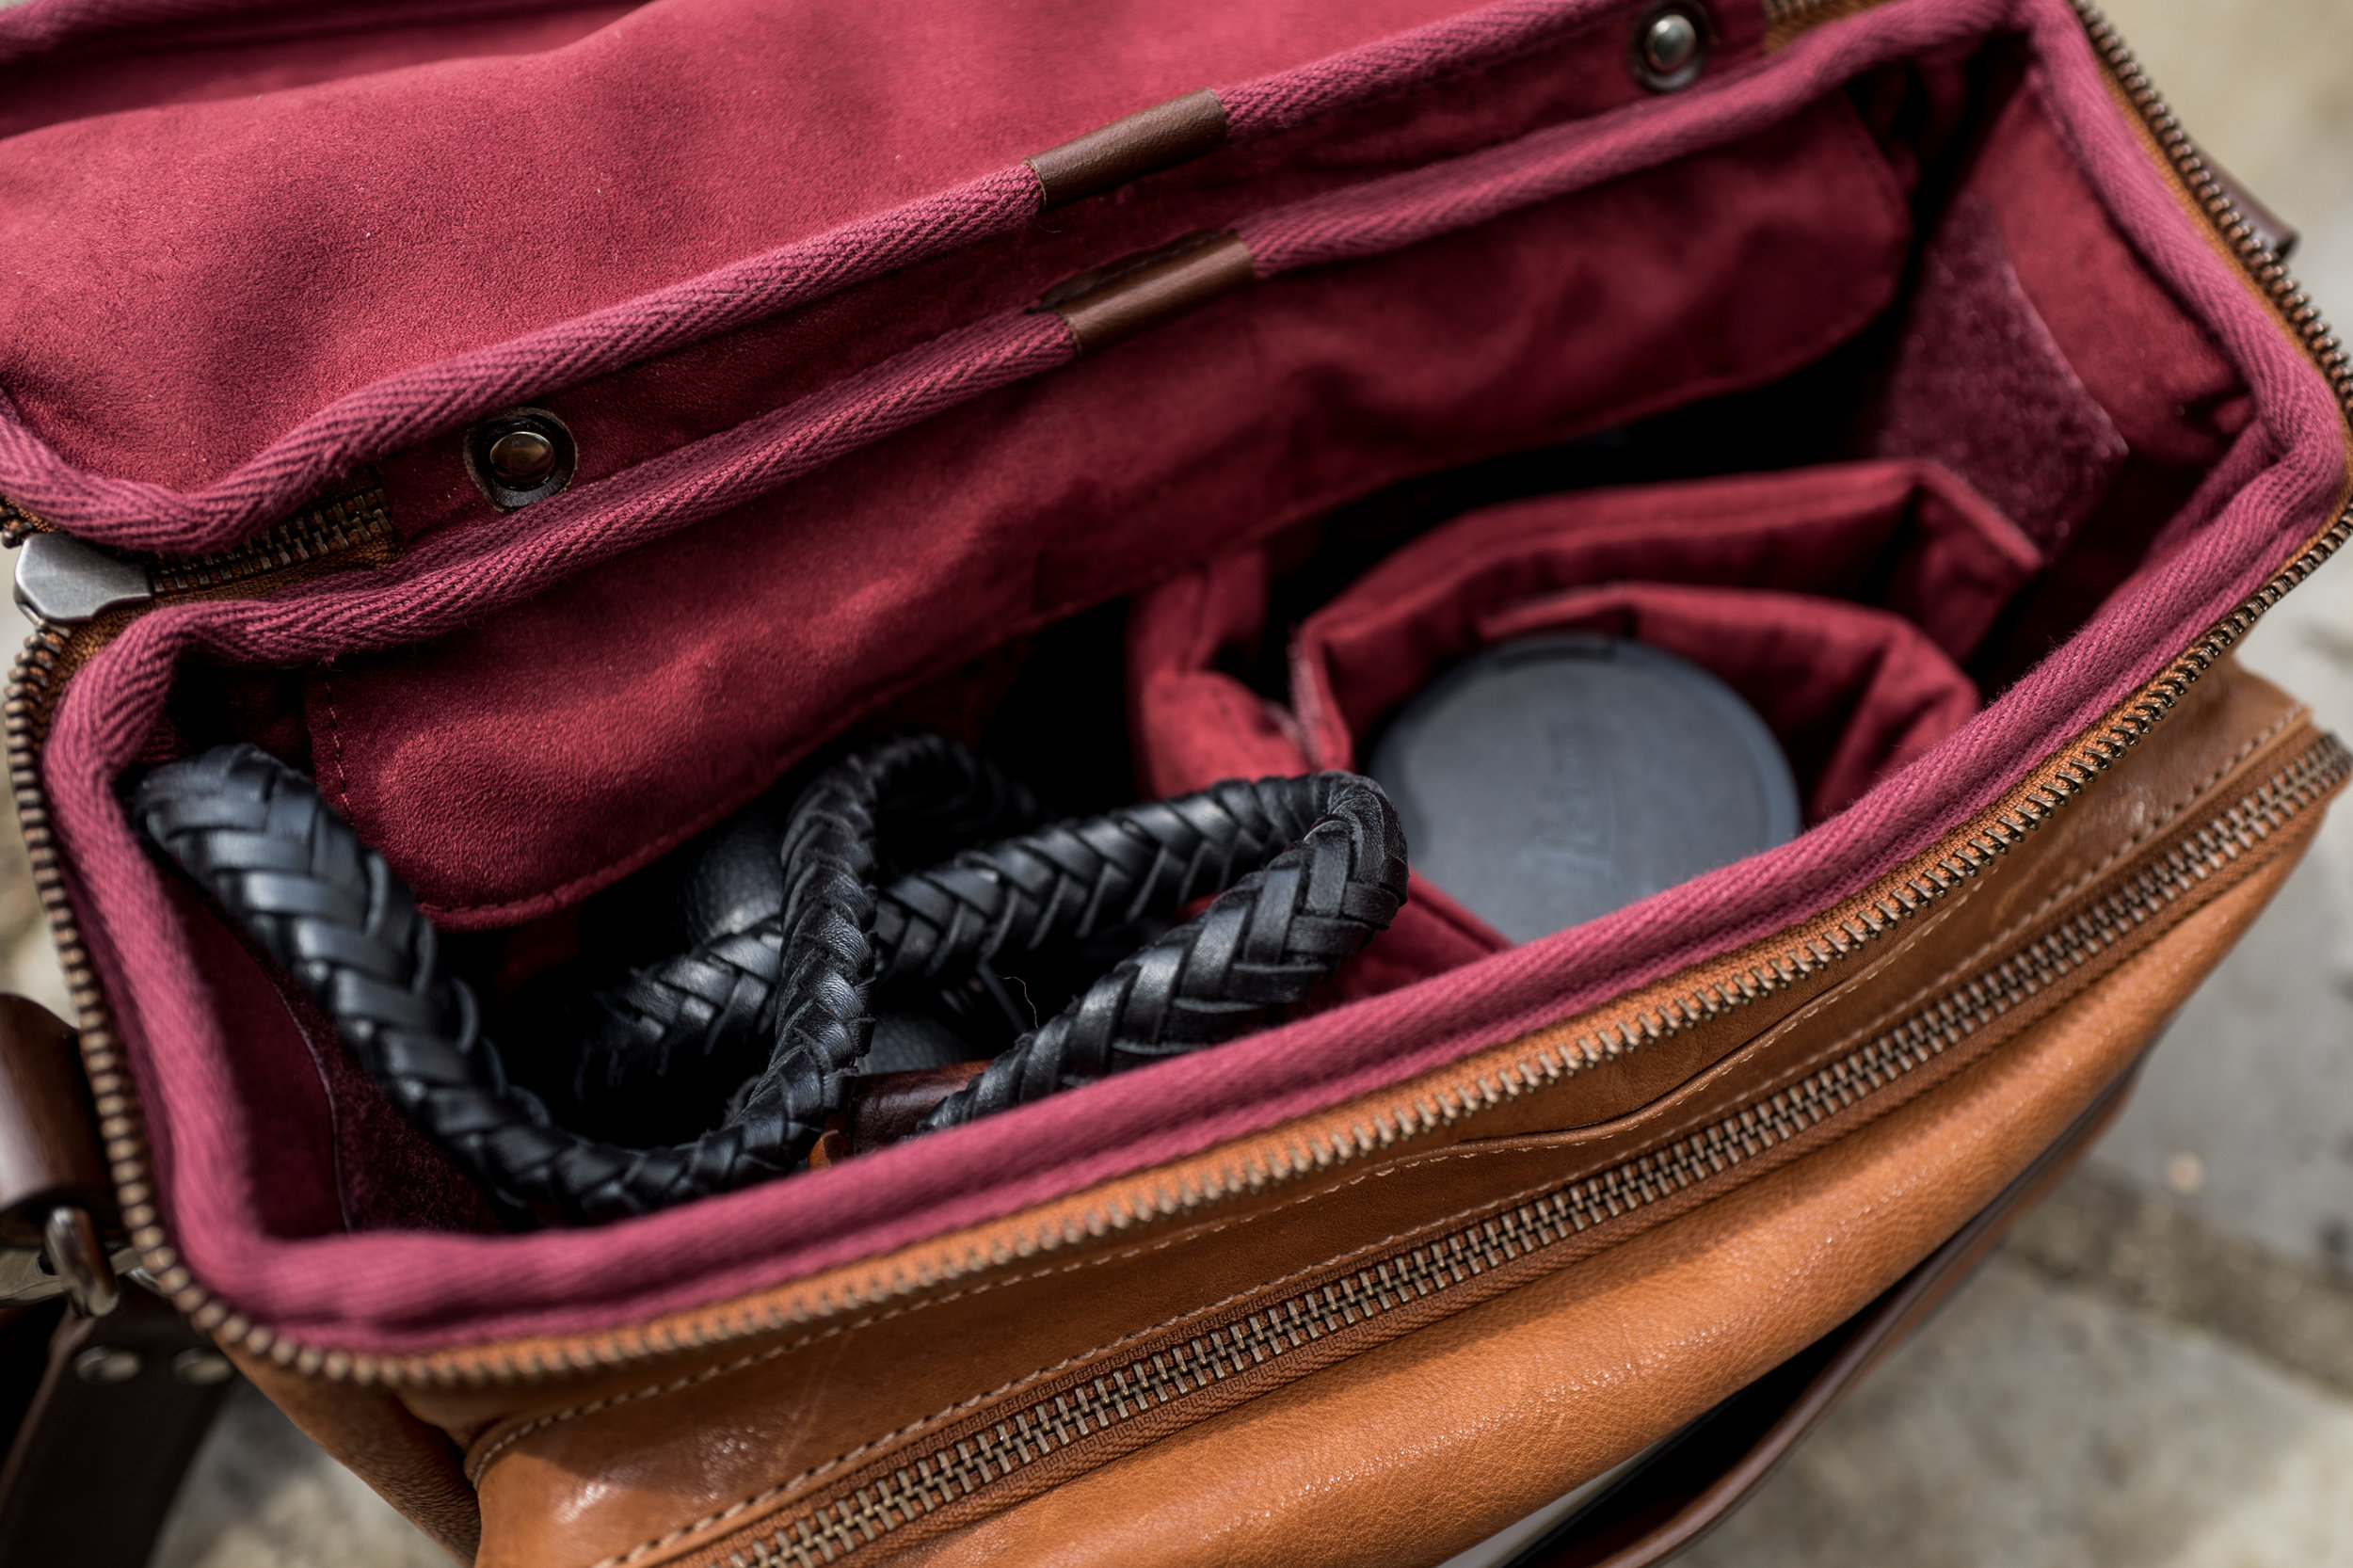 The Wotancraft Ryker Camera Bag Review. Luxury and Function